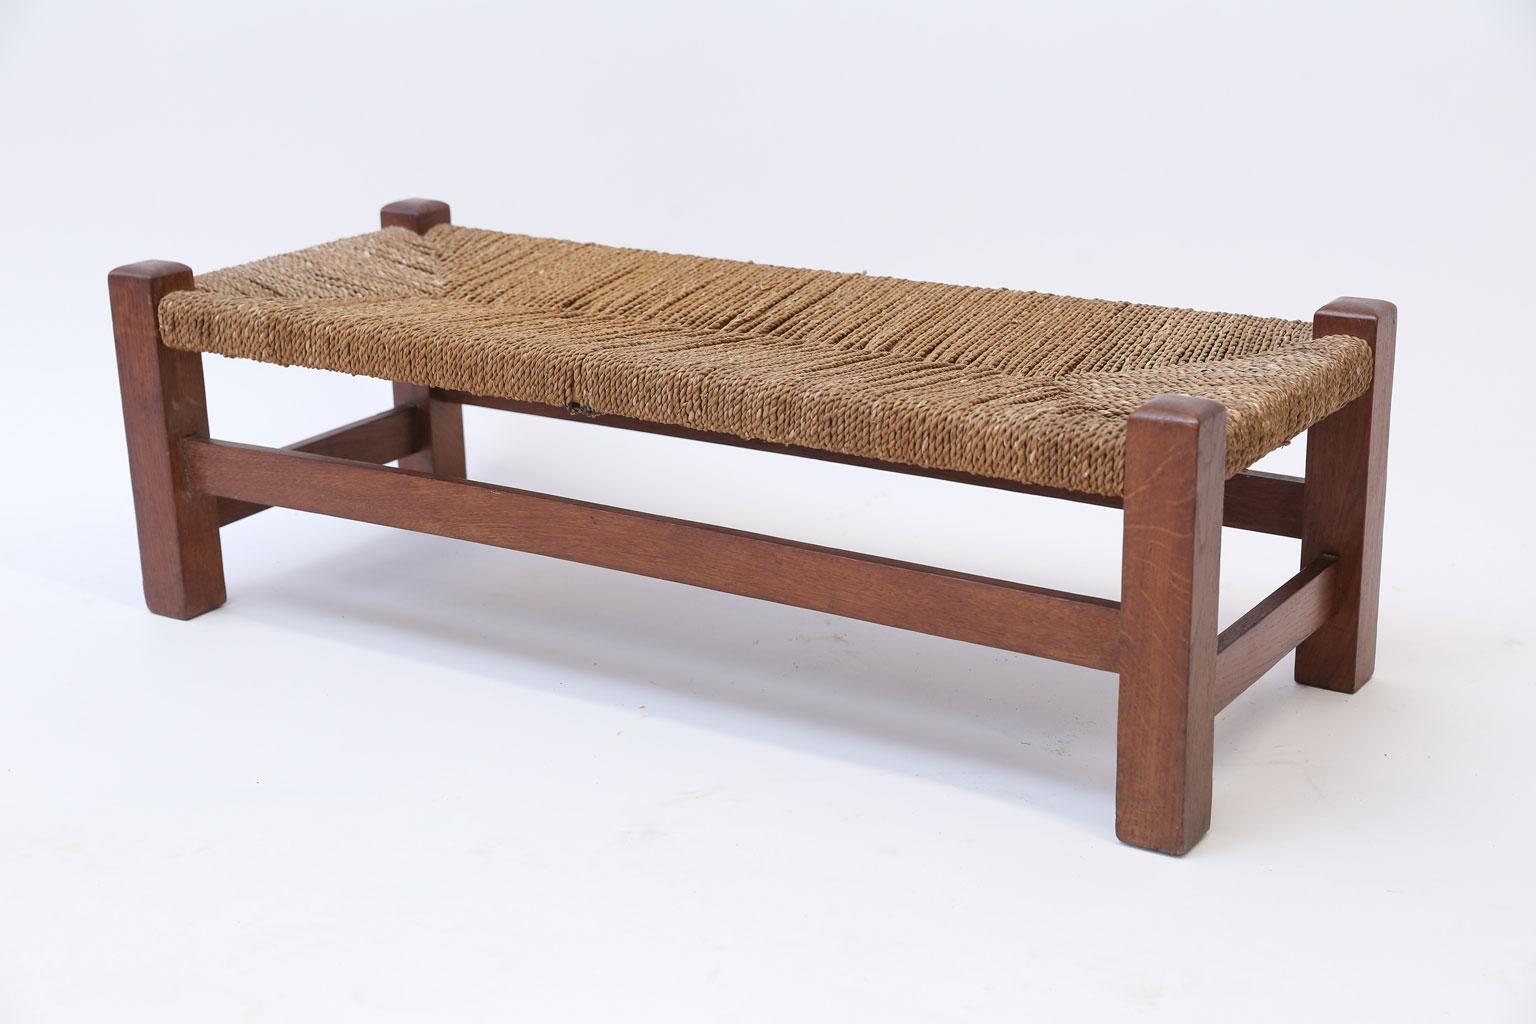 Heals oak and rush long stool, or double footstool, constructed circa 1910-1930 in joined construction with rush seat.